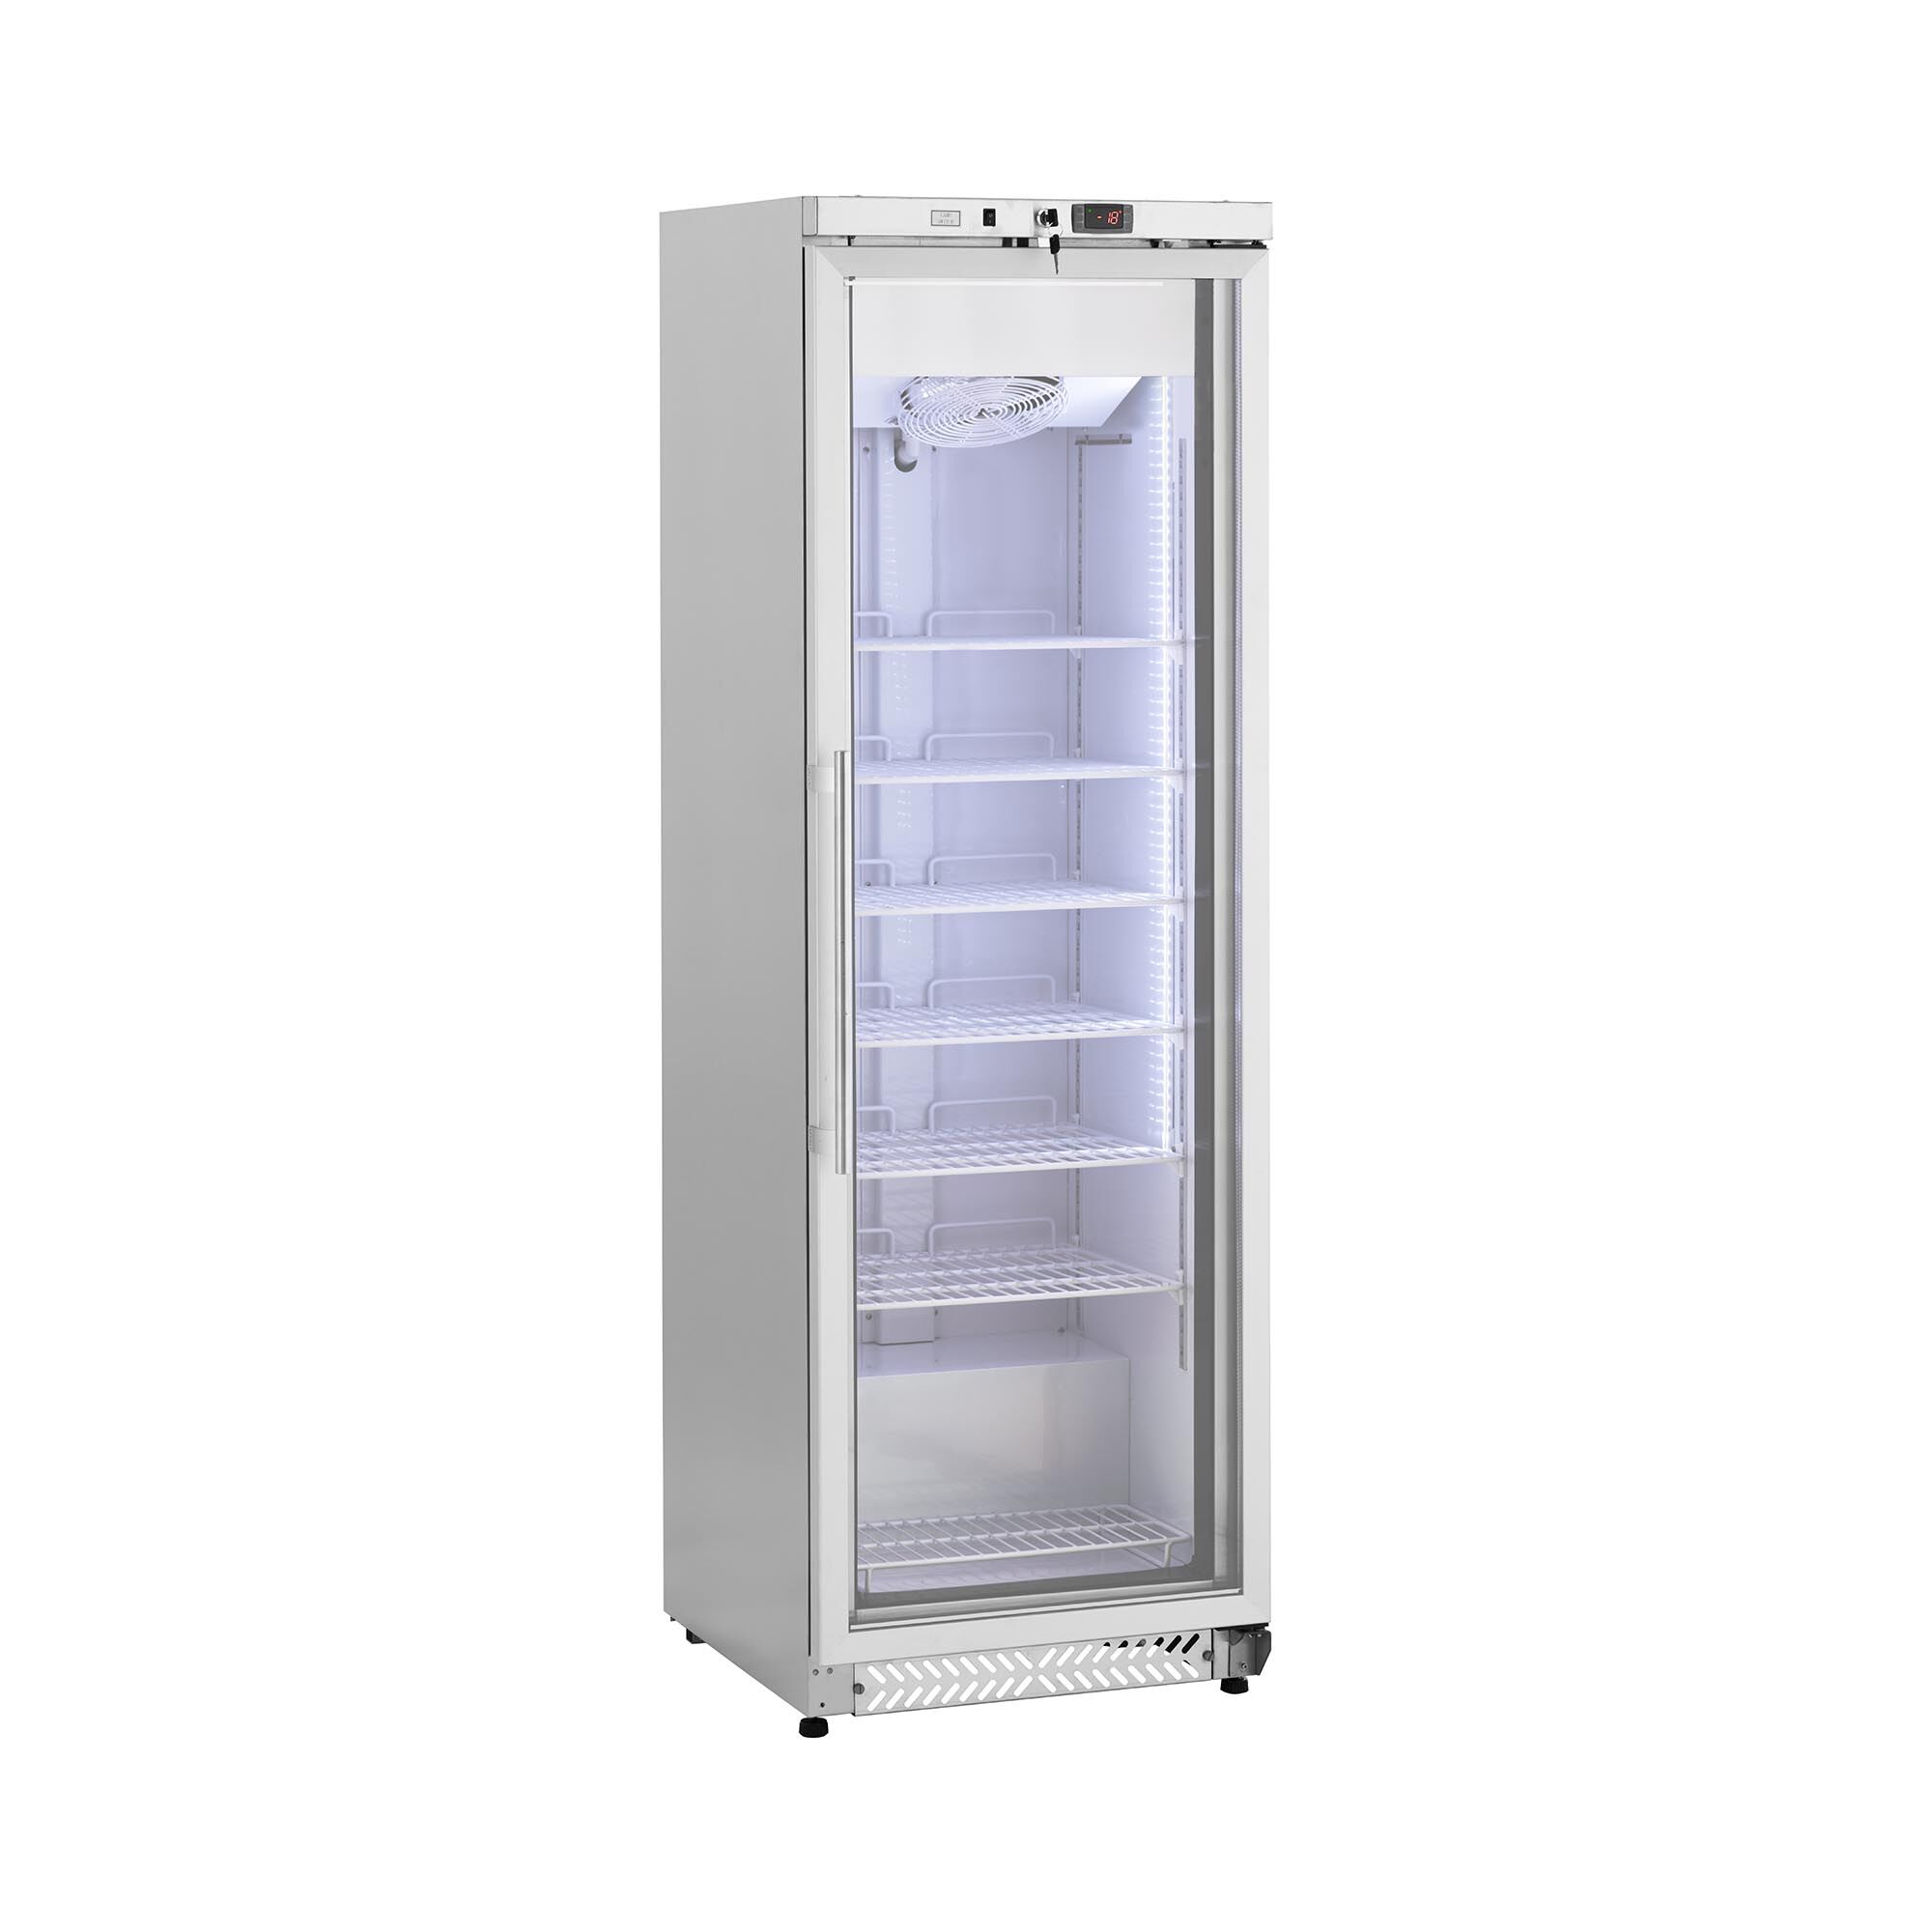 Royal Catering Freezer - 380 L - Royal Catering - glass door - Silver - refrigerant R290